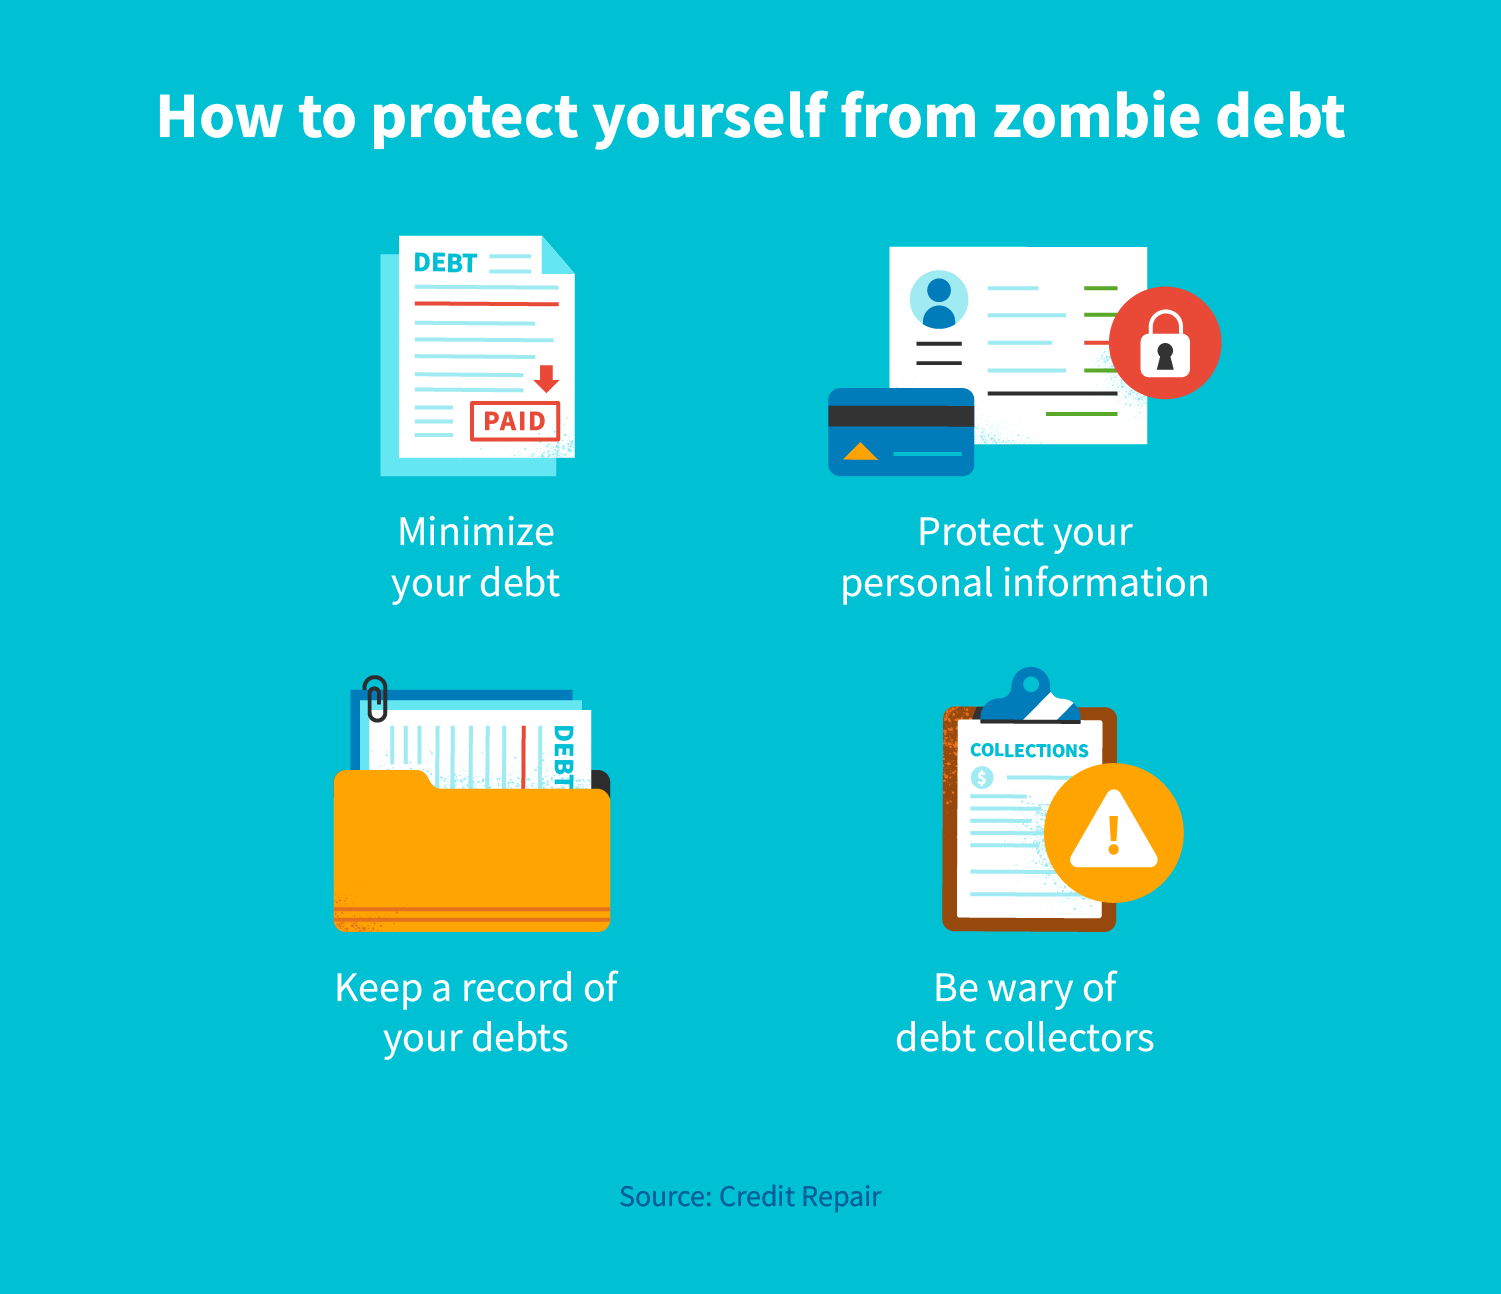 How to protect yourself from zombie debt